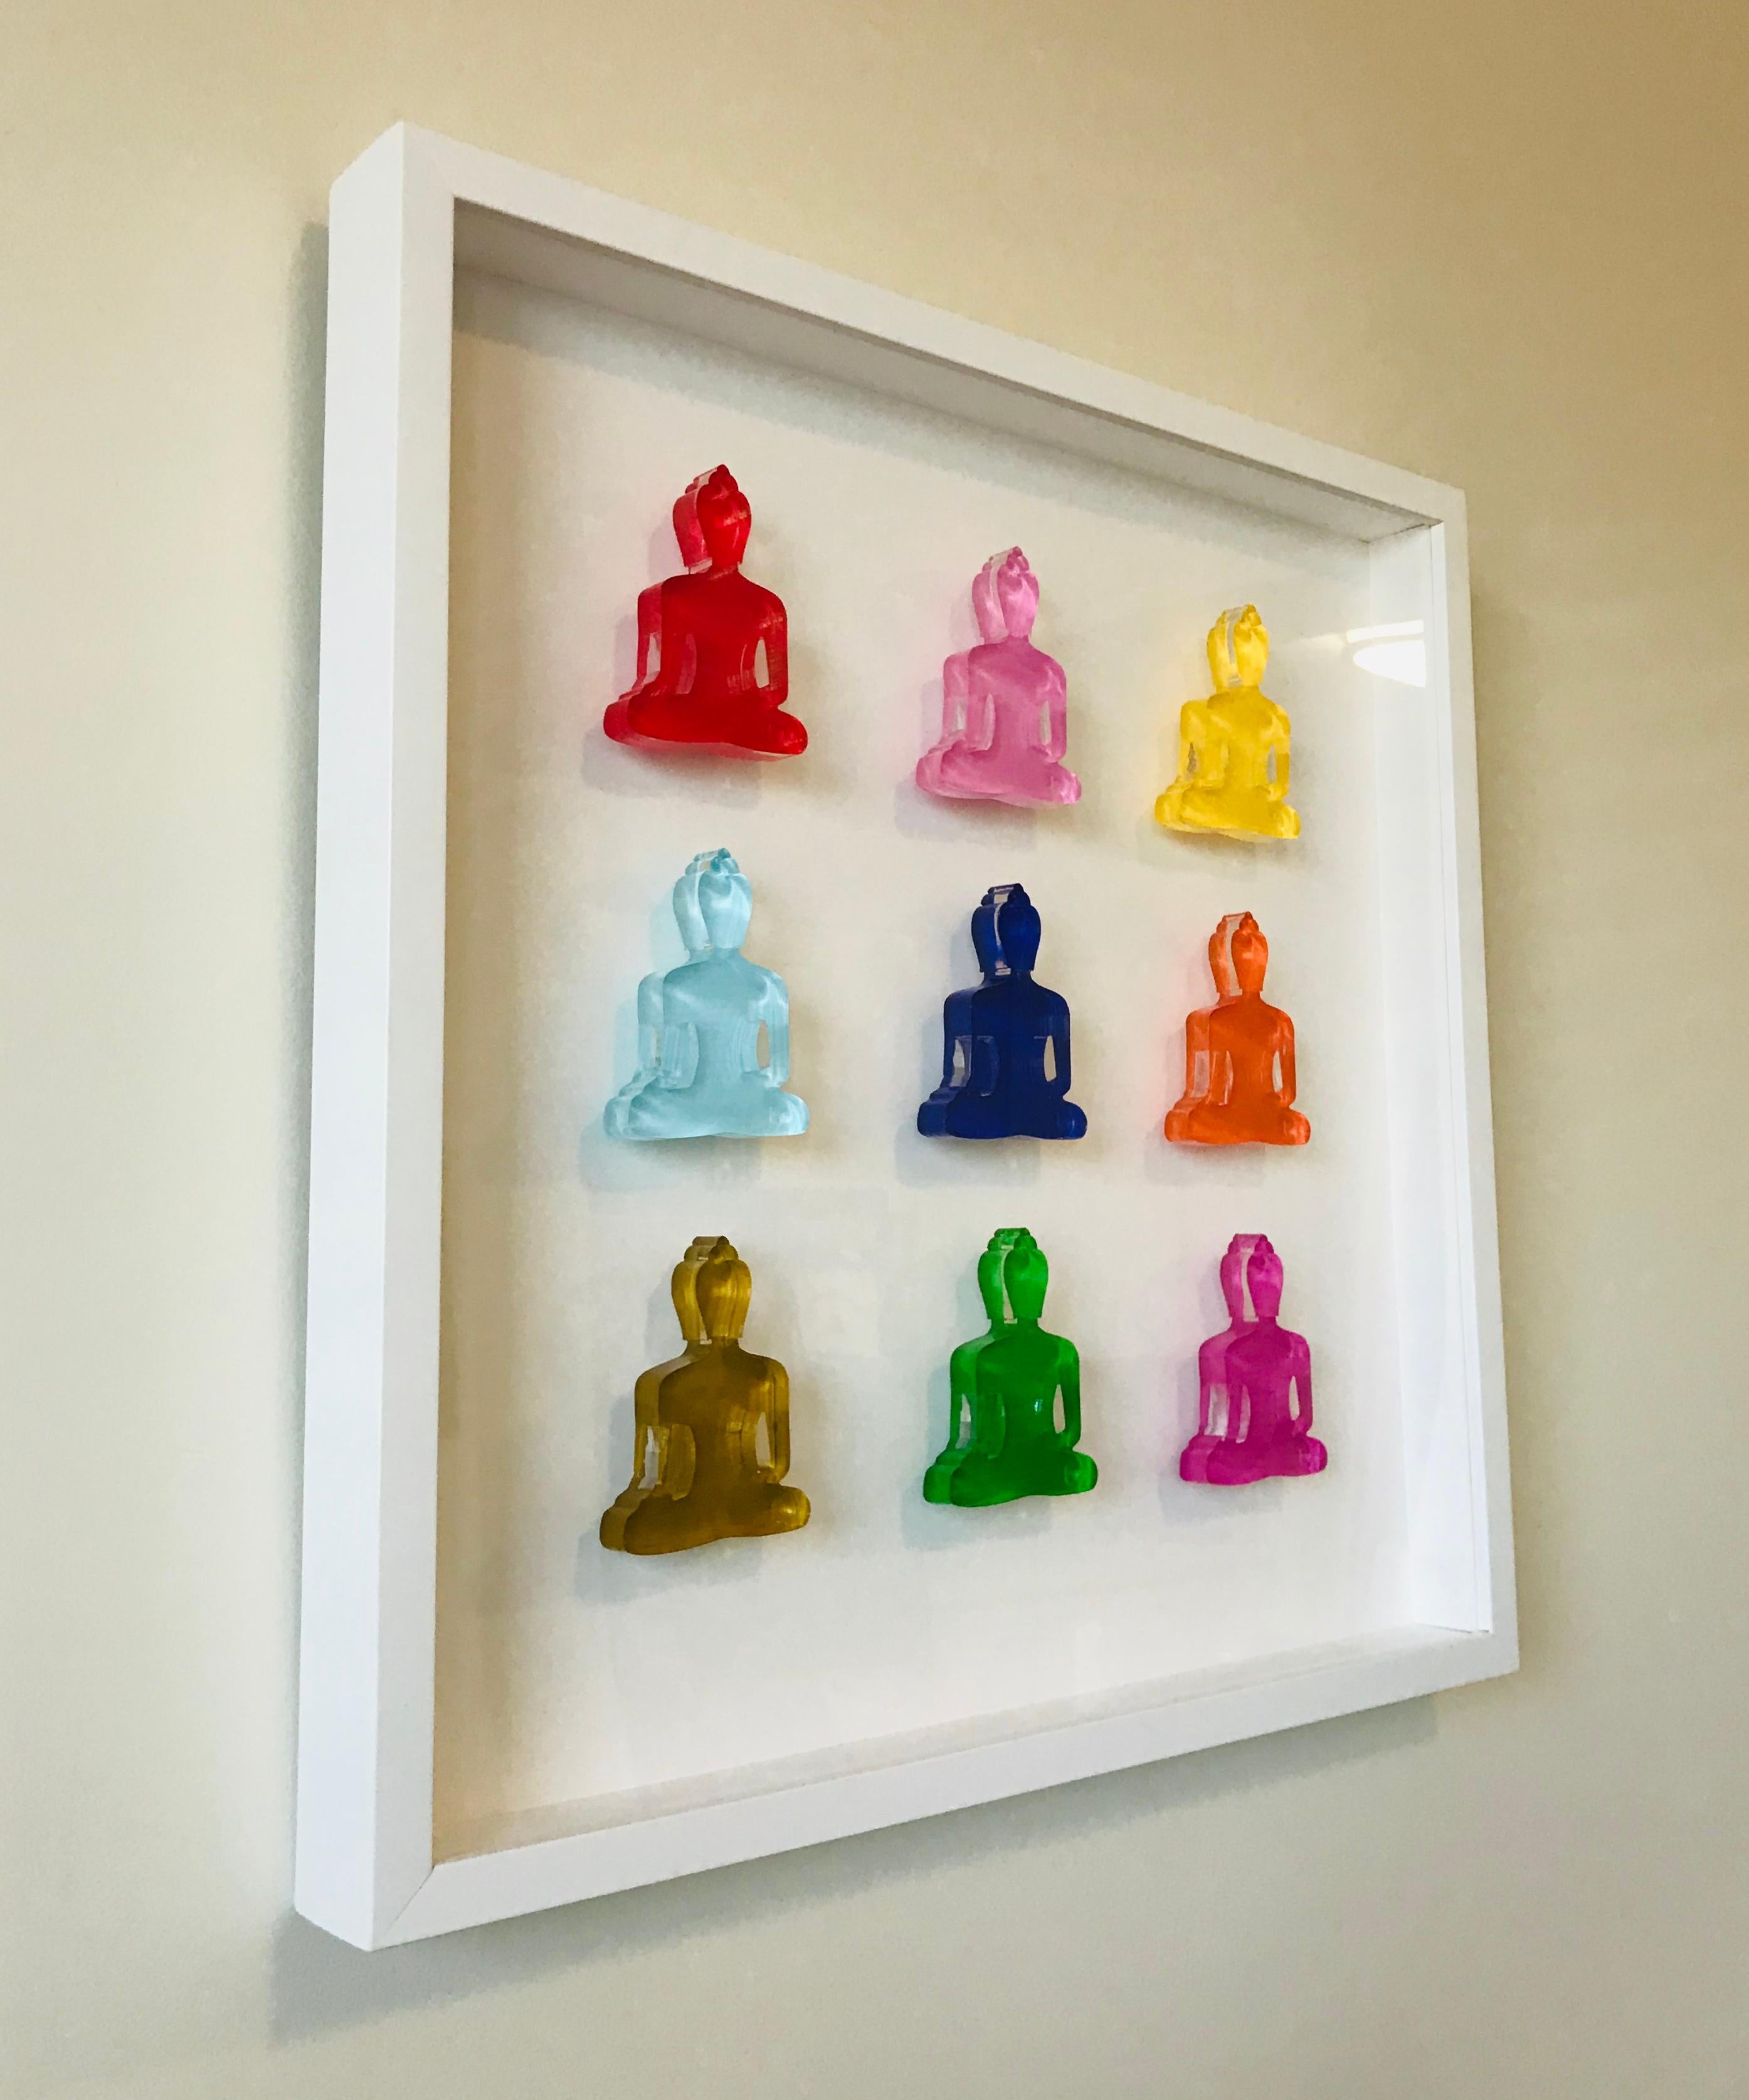 This 3D art piece is made of 9 hand painted laser cut plexiglas pieces that were mounted to an archival foam board backing, framed with a white wooden 2